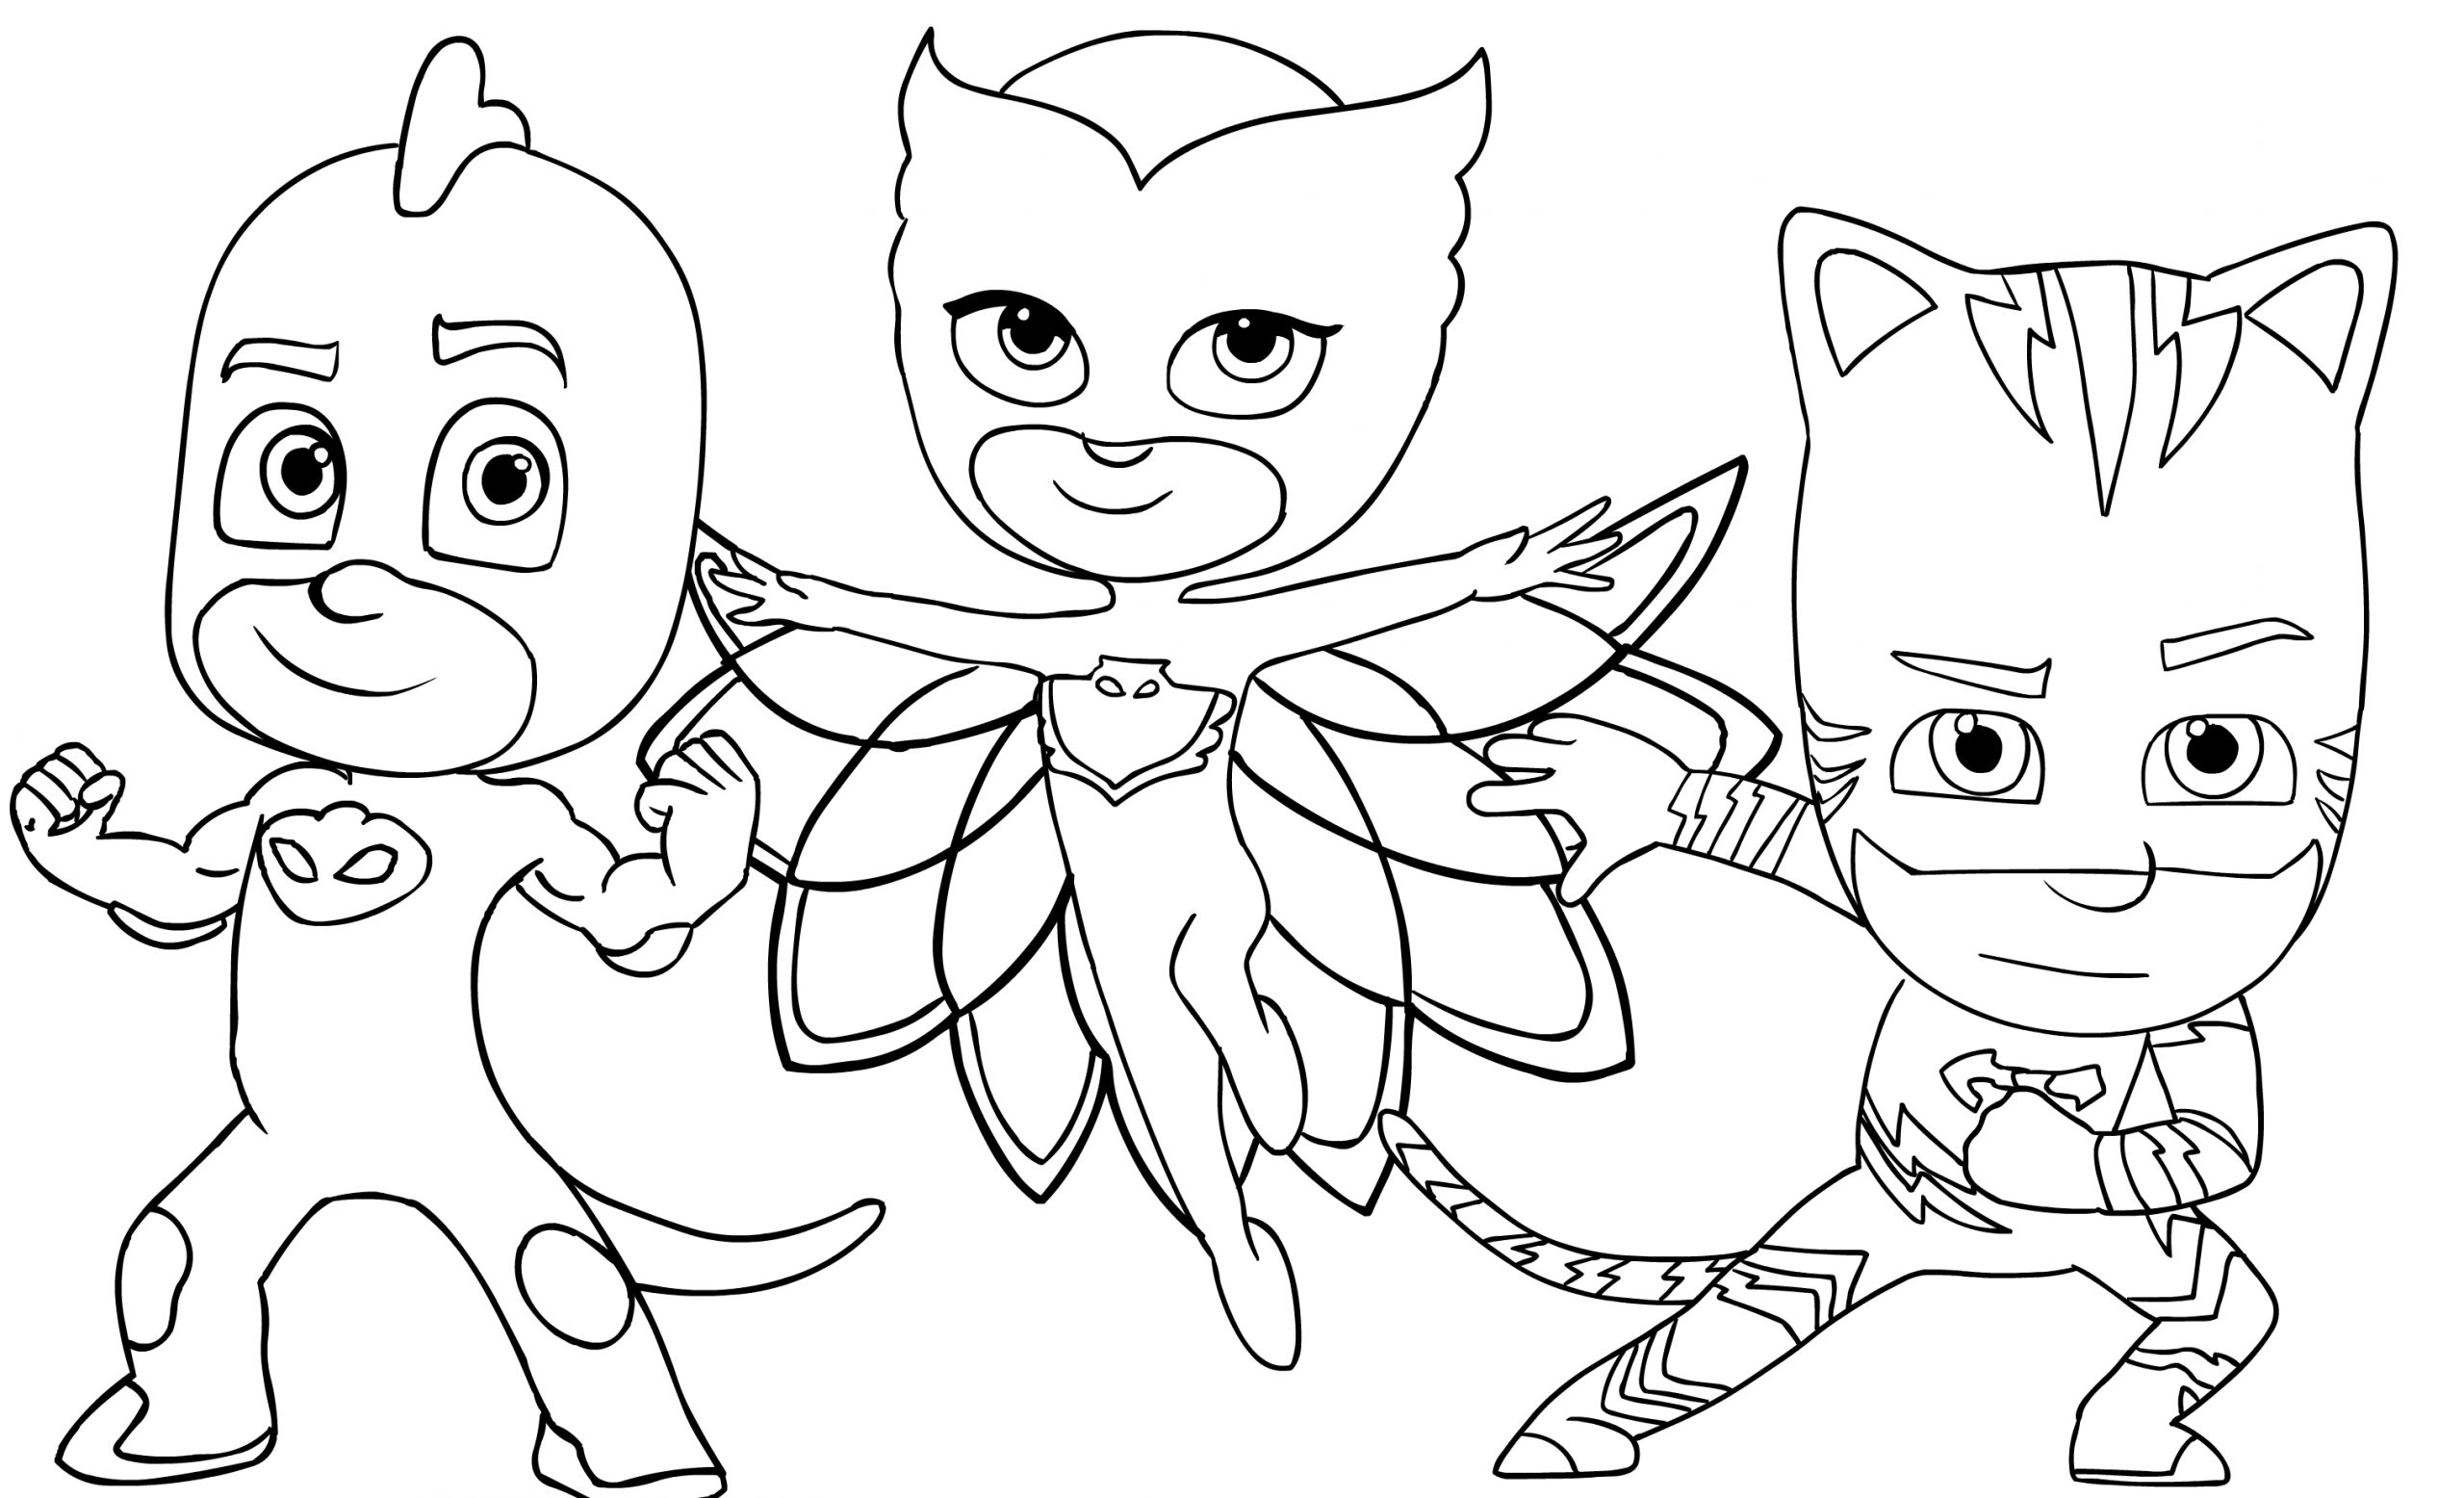 coloring-book-free-coloring-page-for-kids-printable-pj-masks-to-print-disney-outstanding